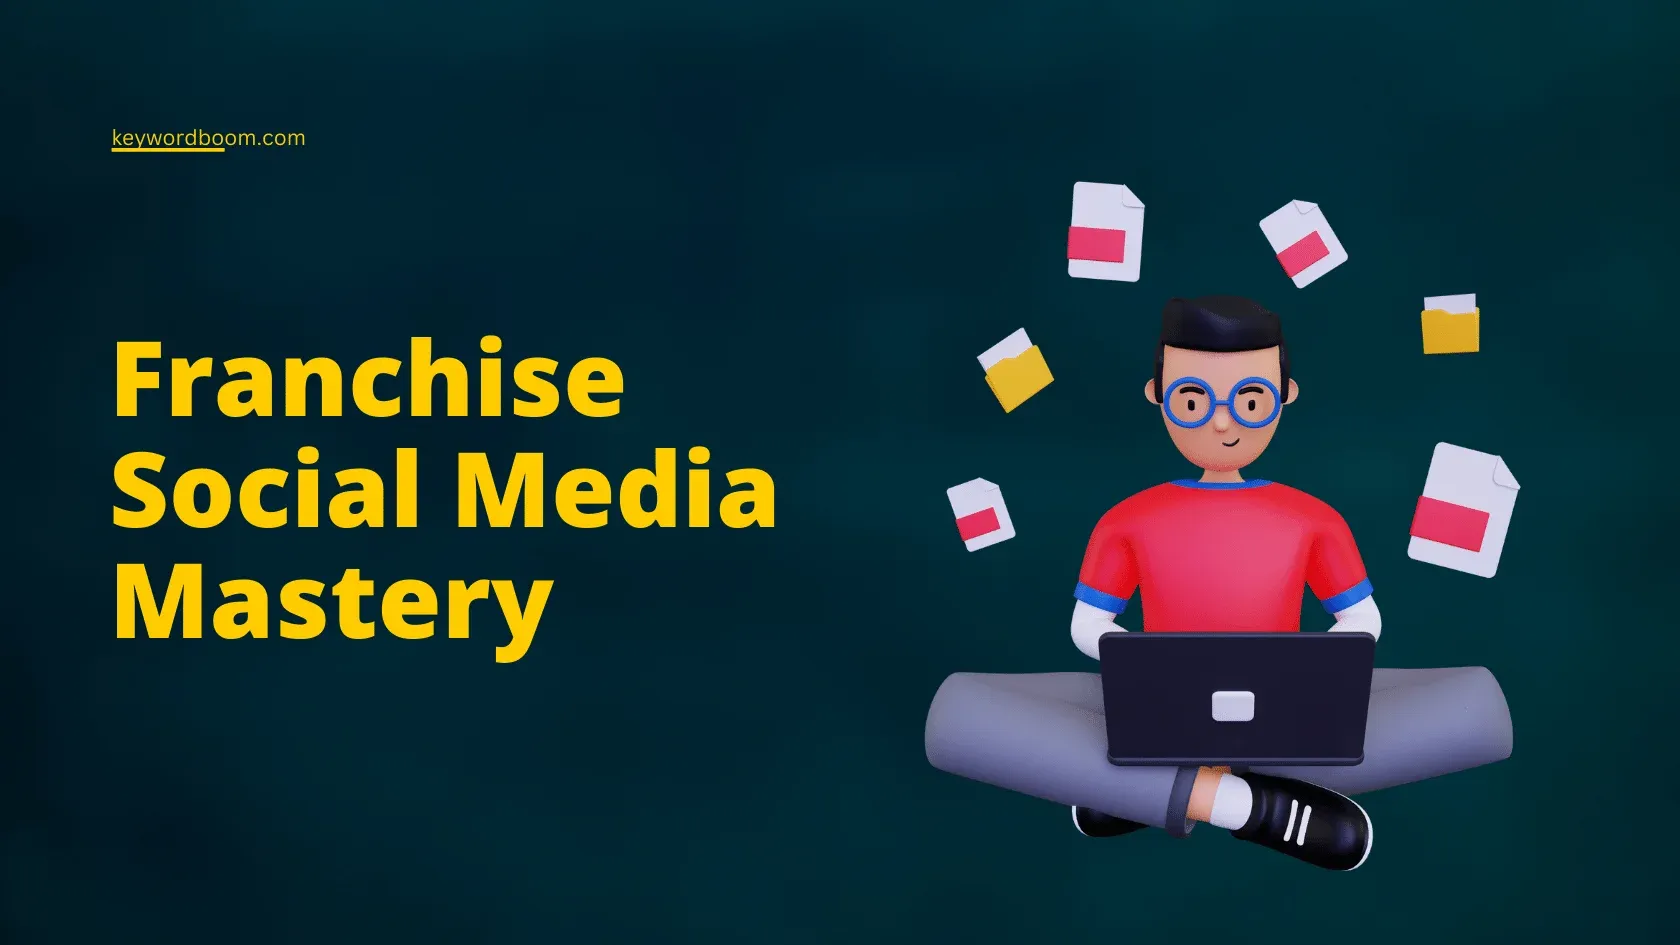 3D illustration of a character with a laptop and floating documents, titled "Franchise Social Media Mastery".